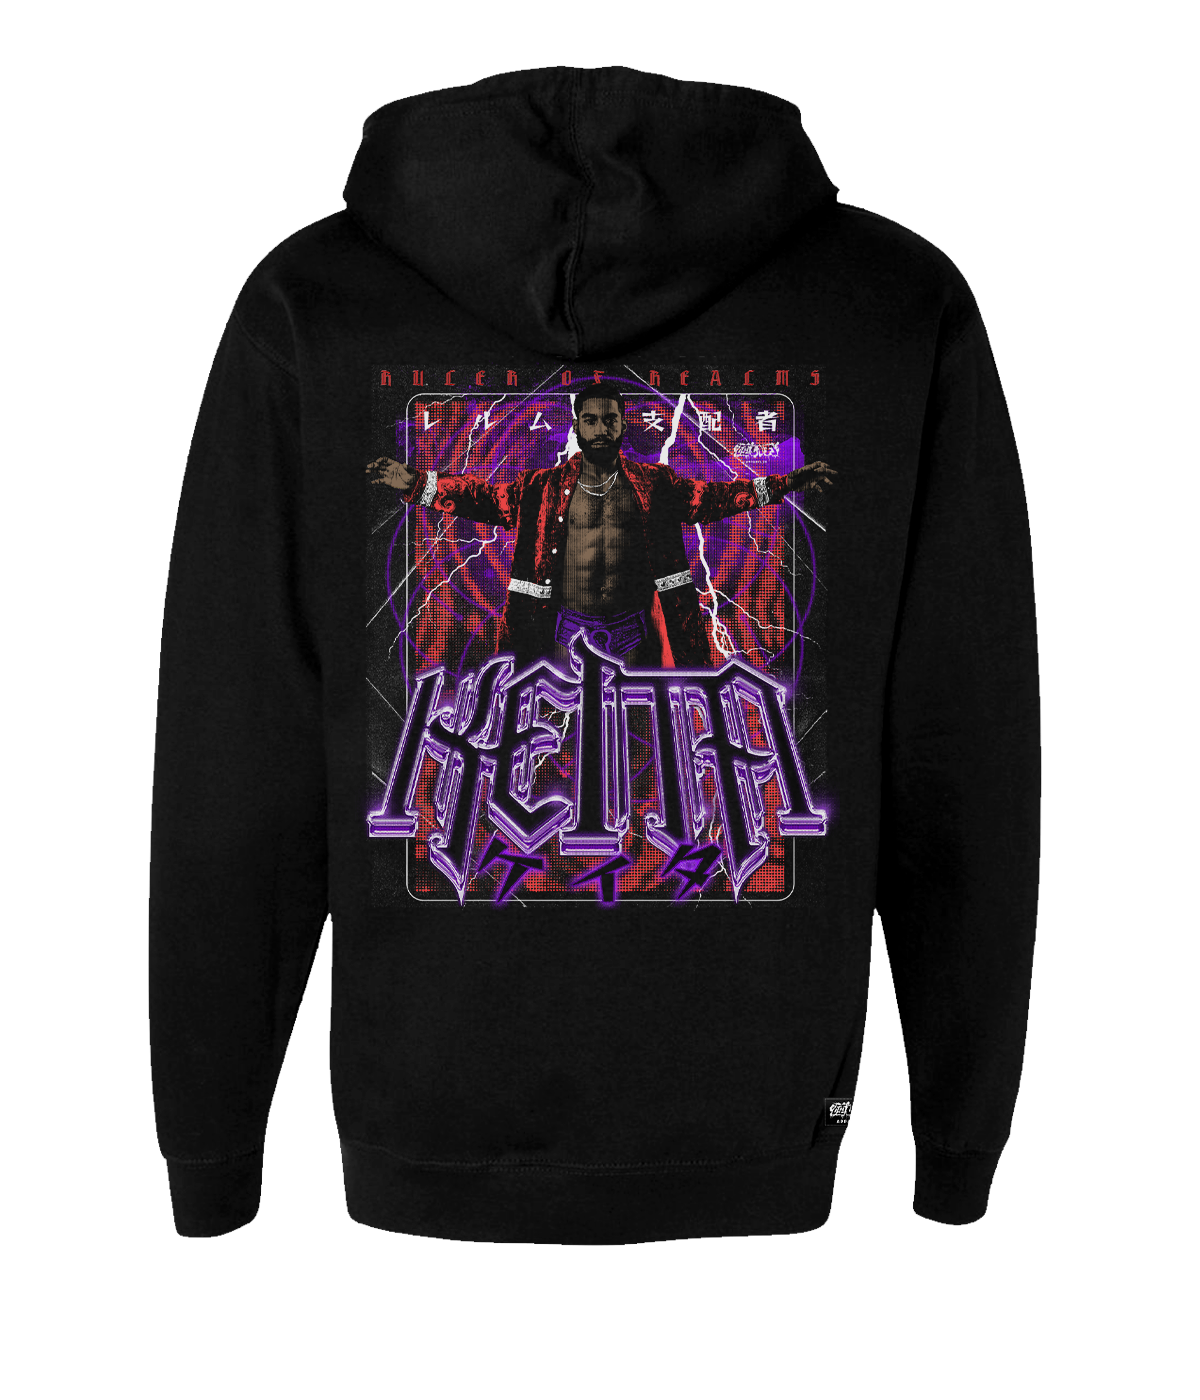 KEITA - Ruler of Realms Hoodie (Double Sided)